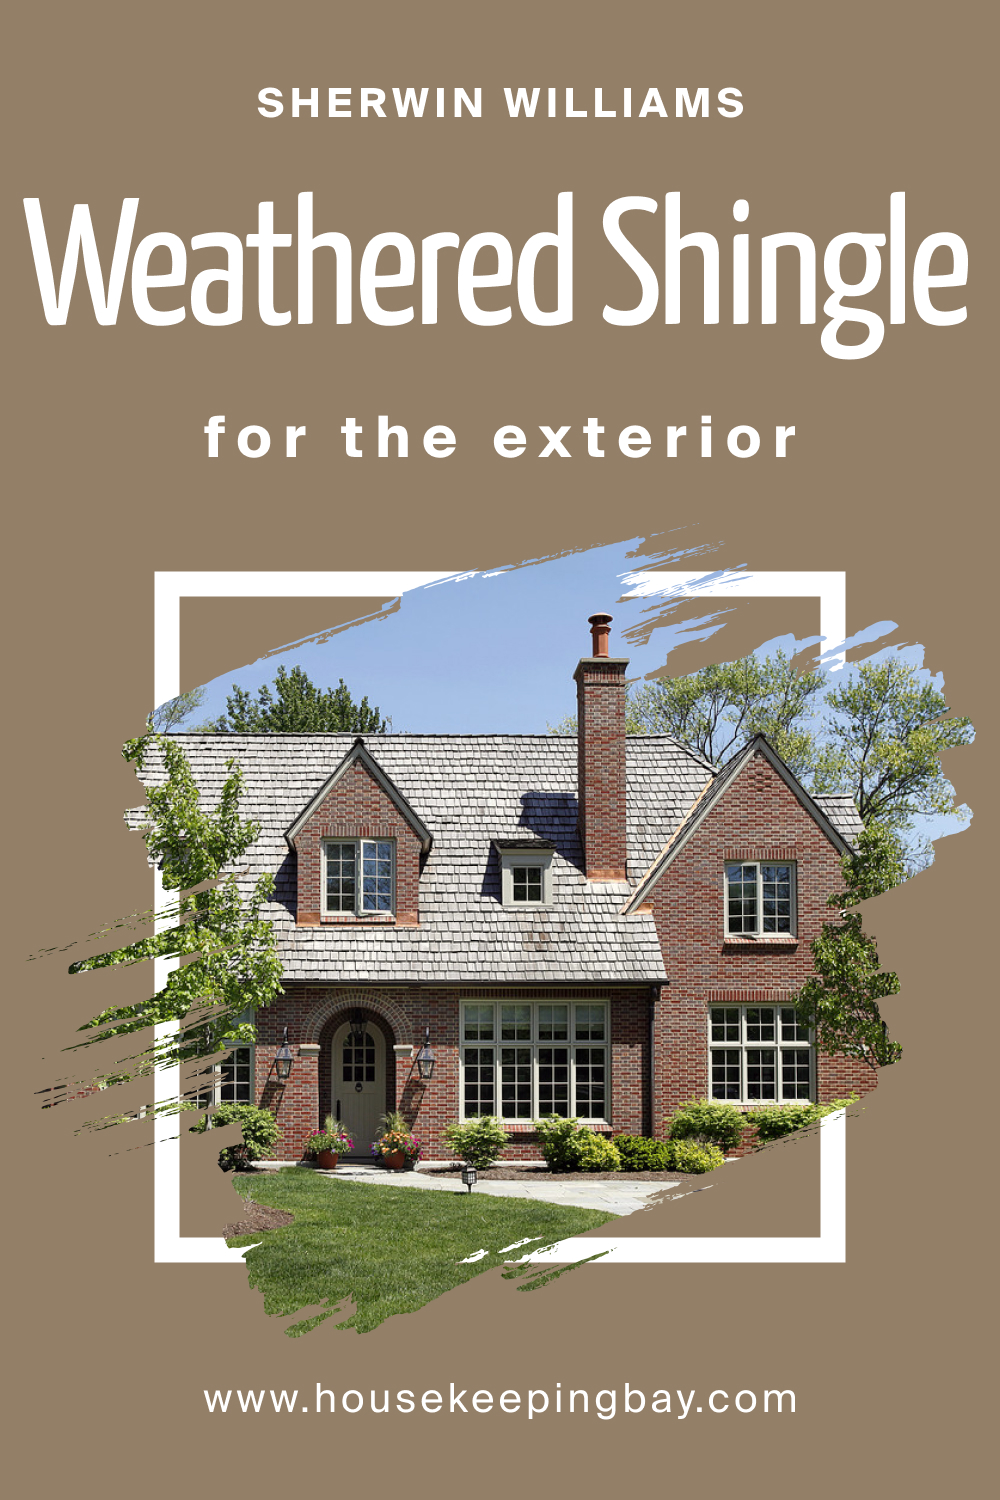 Sherwin Williams. SW 2841 Weathered Shingle For the exterior